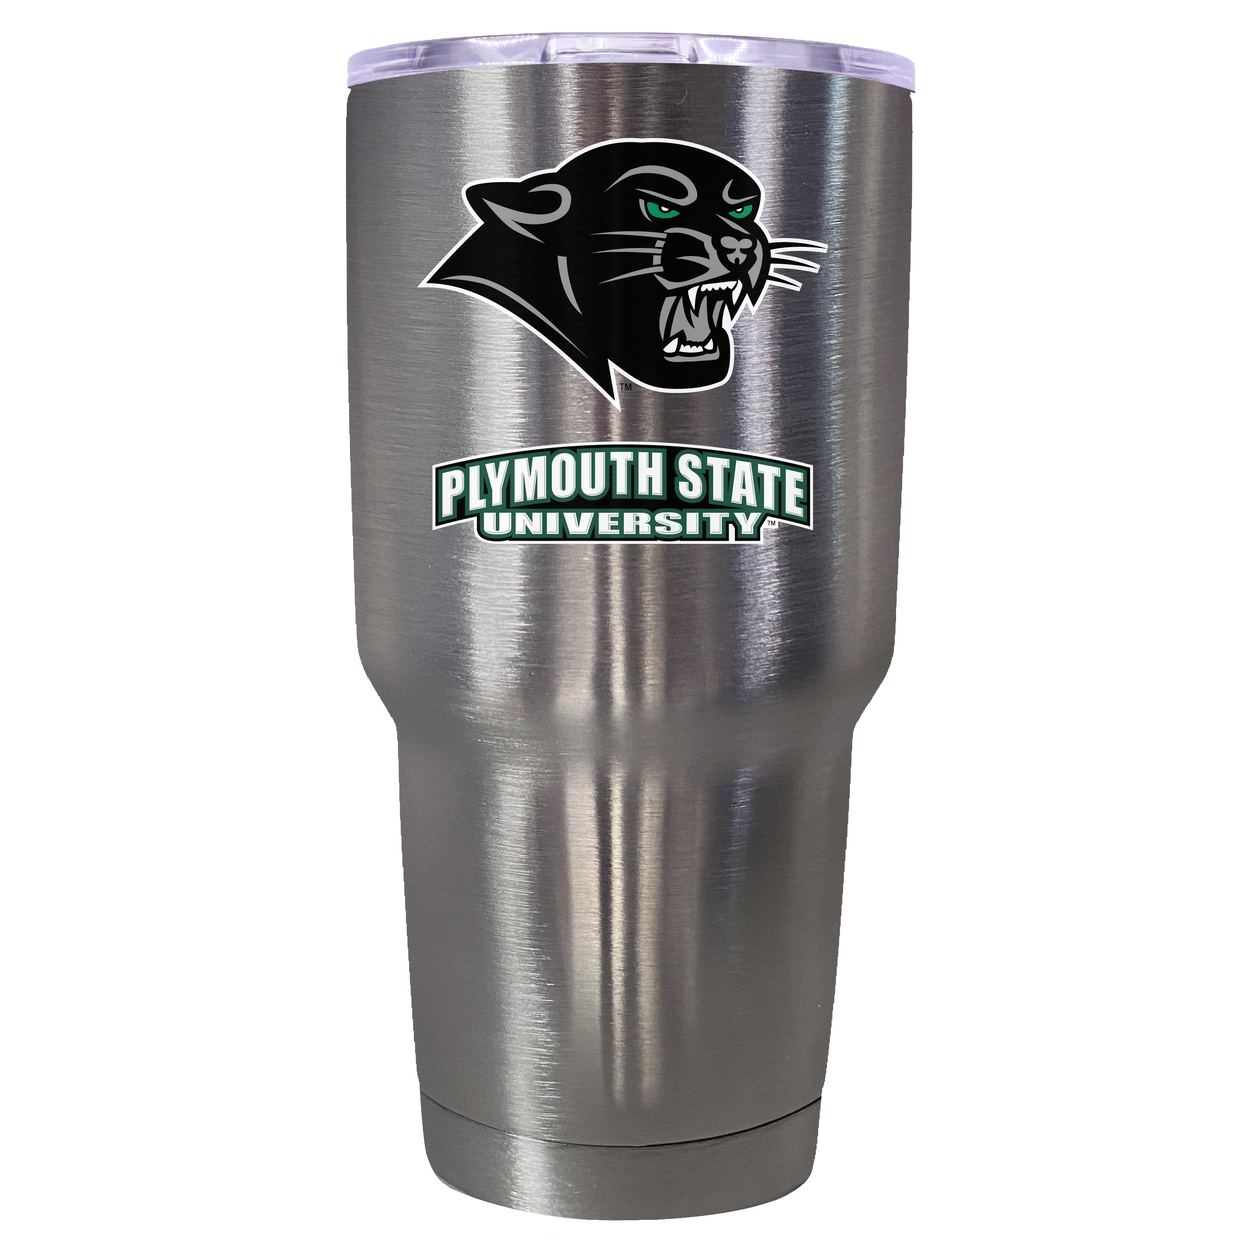 Plymouth State University 24 Oz Insulated Stainless Steel Tumbler